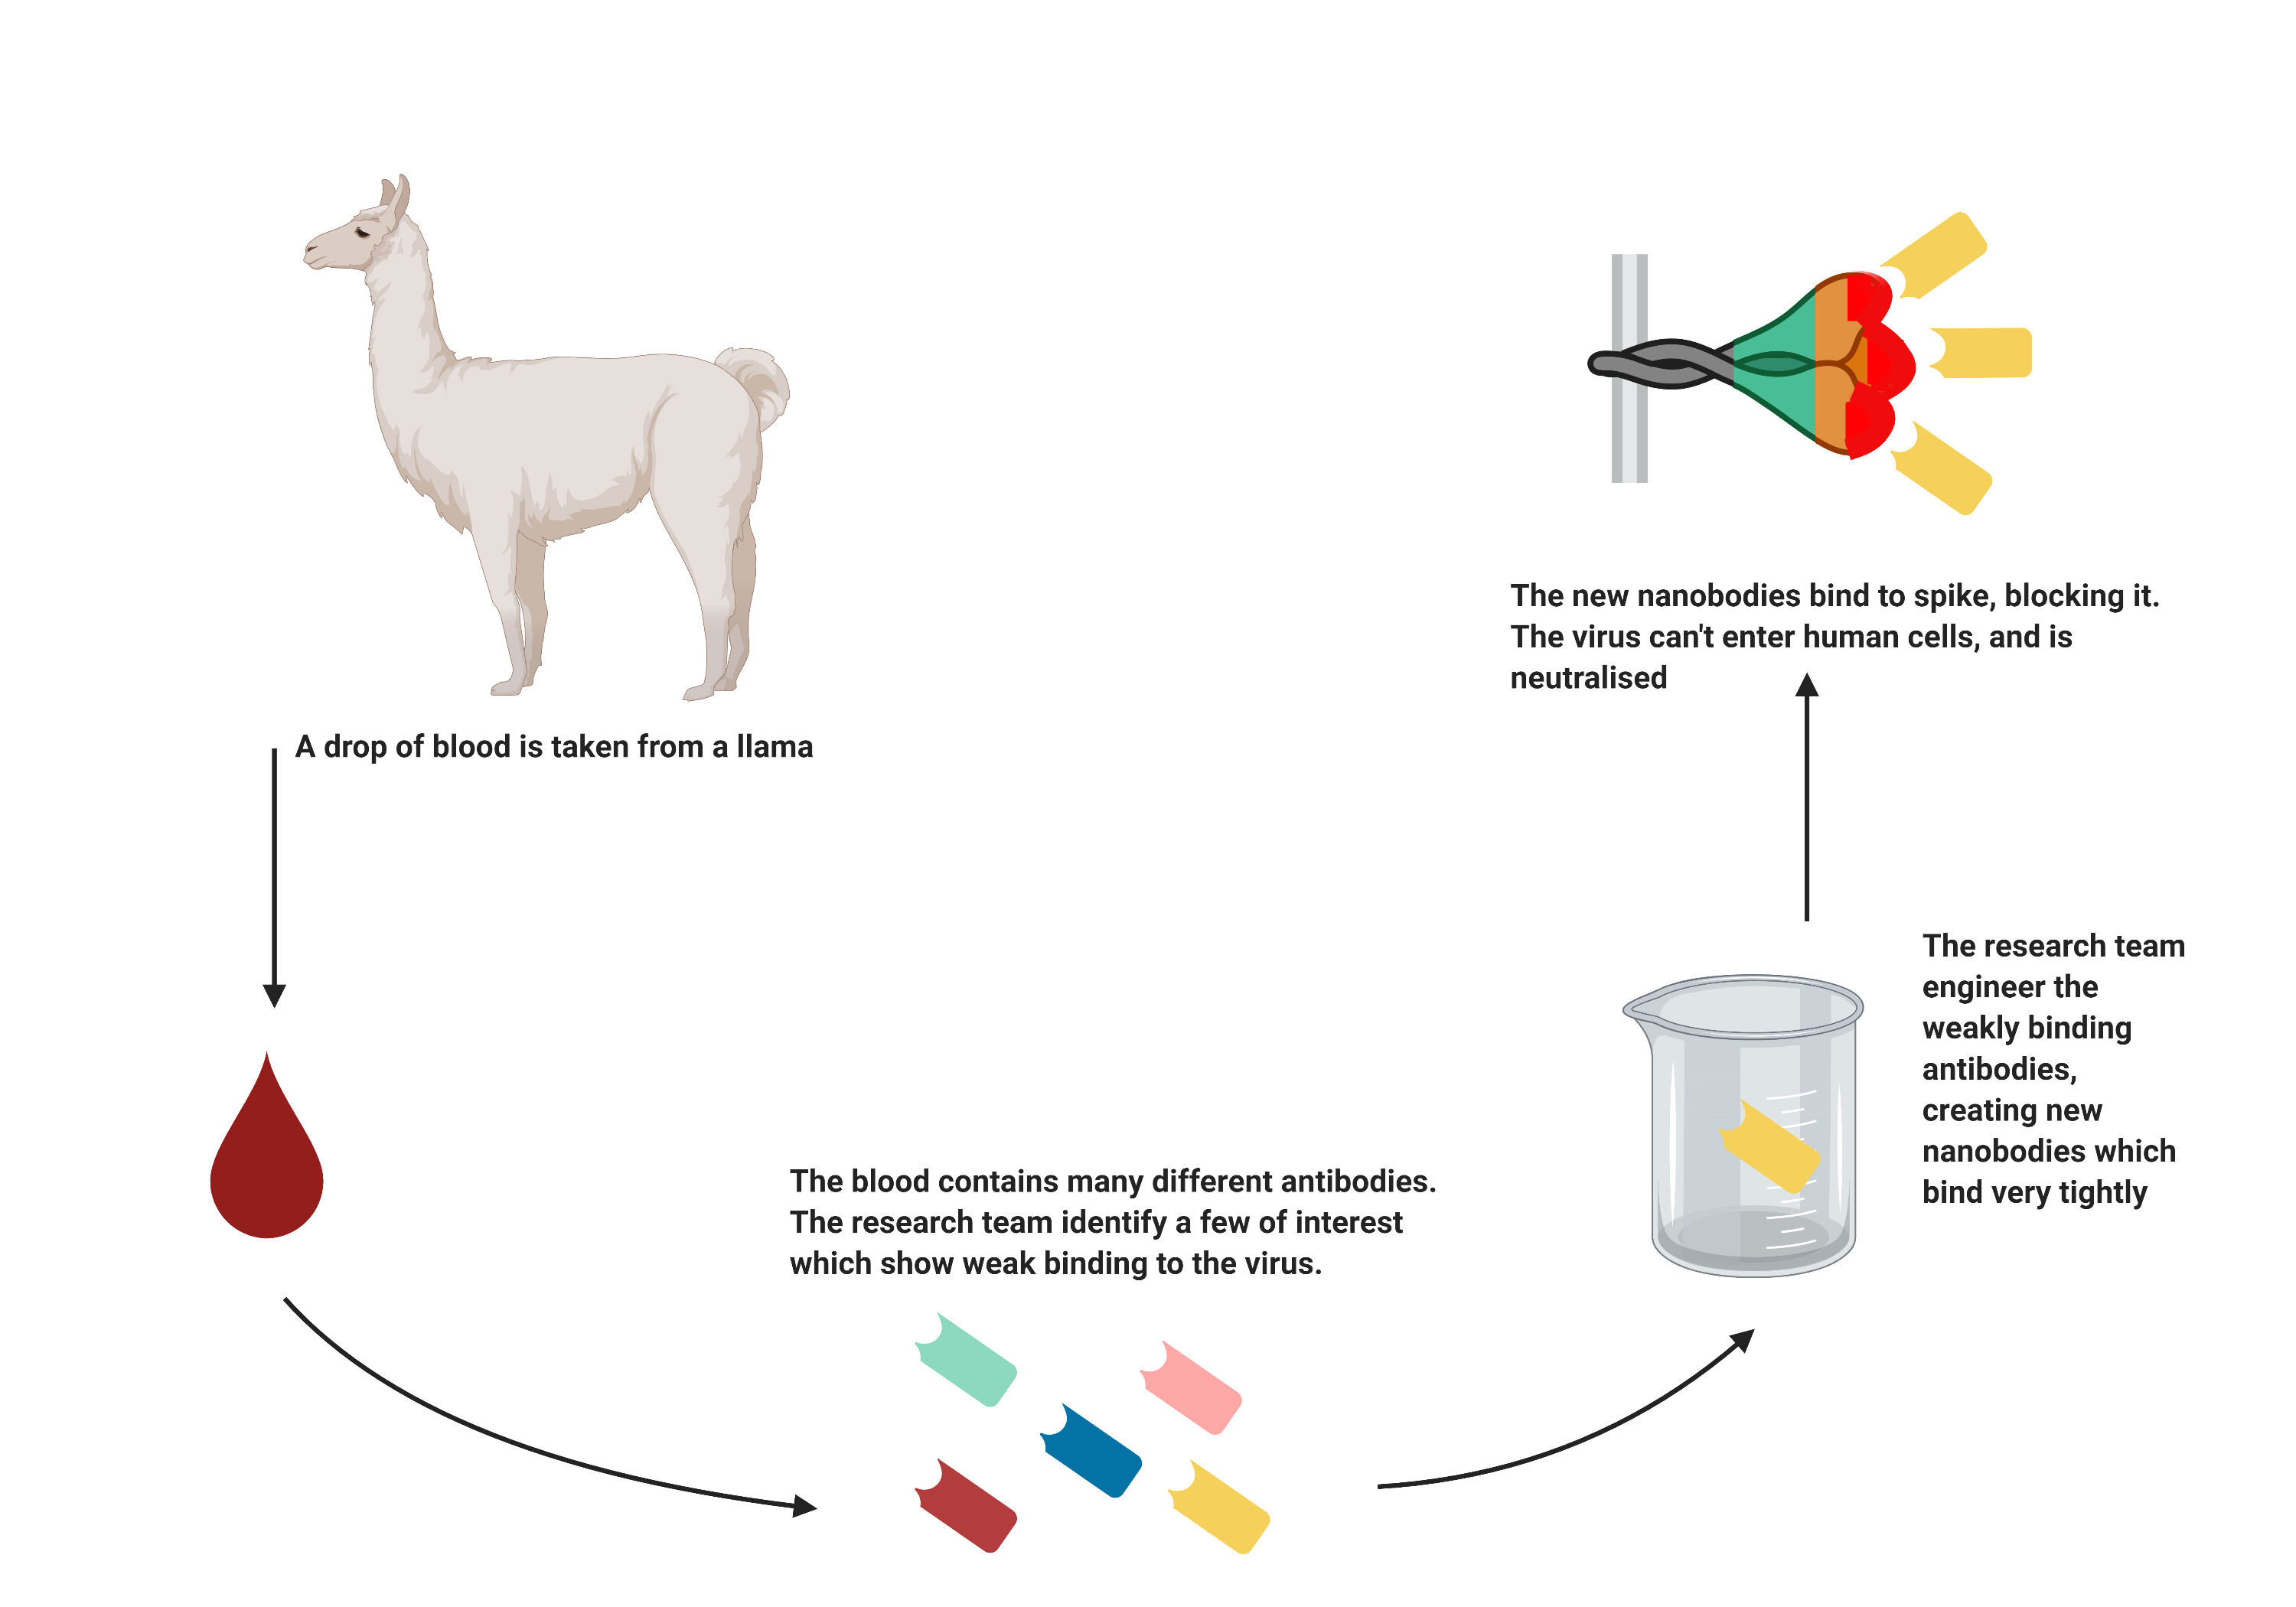 Graphic showing how blood from a llama creates new nanobodies